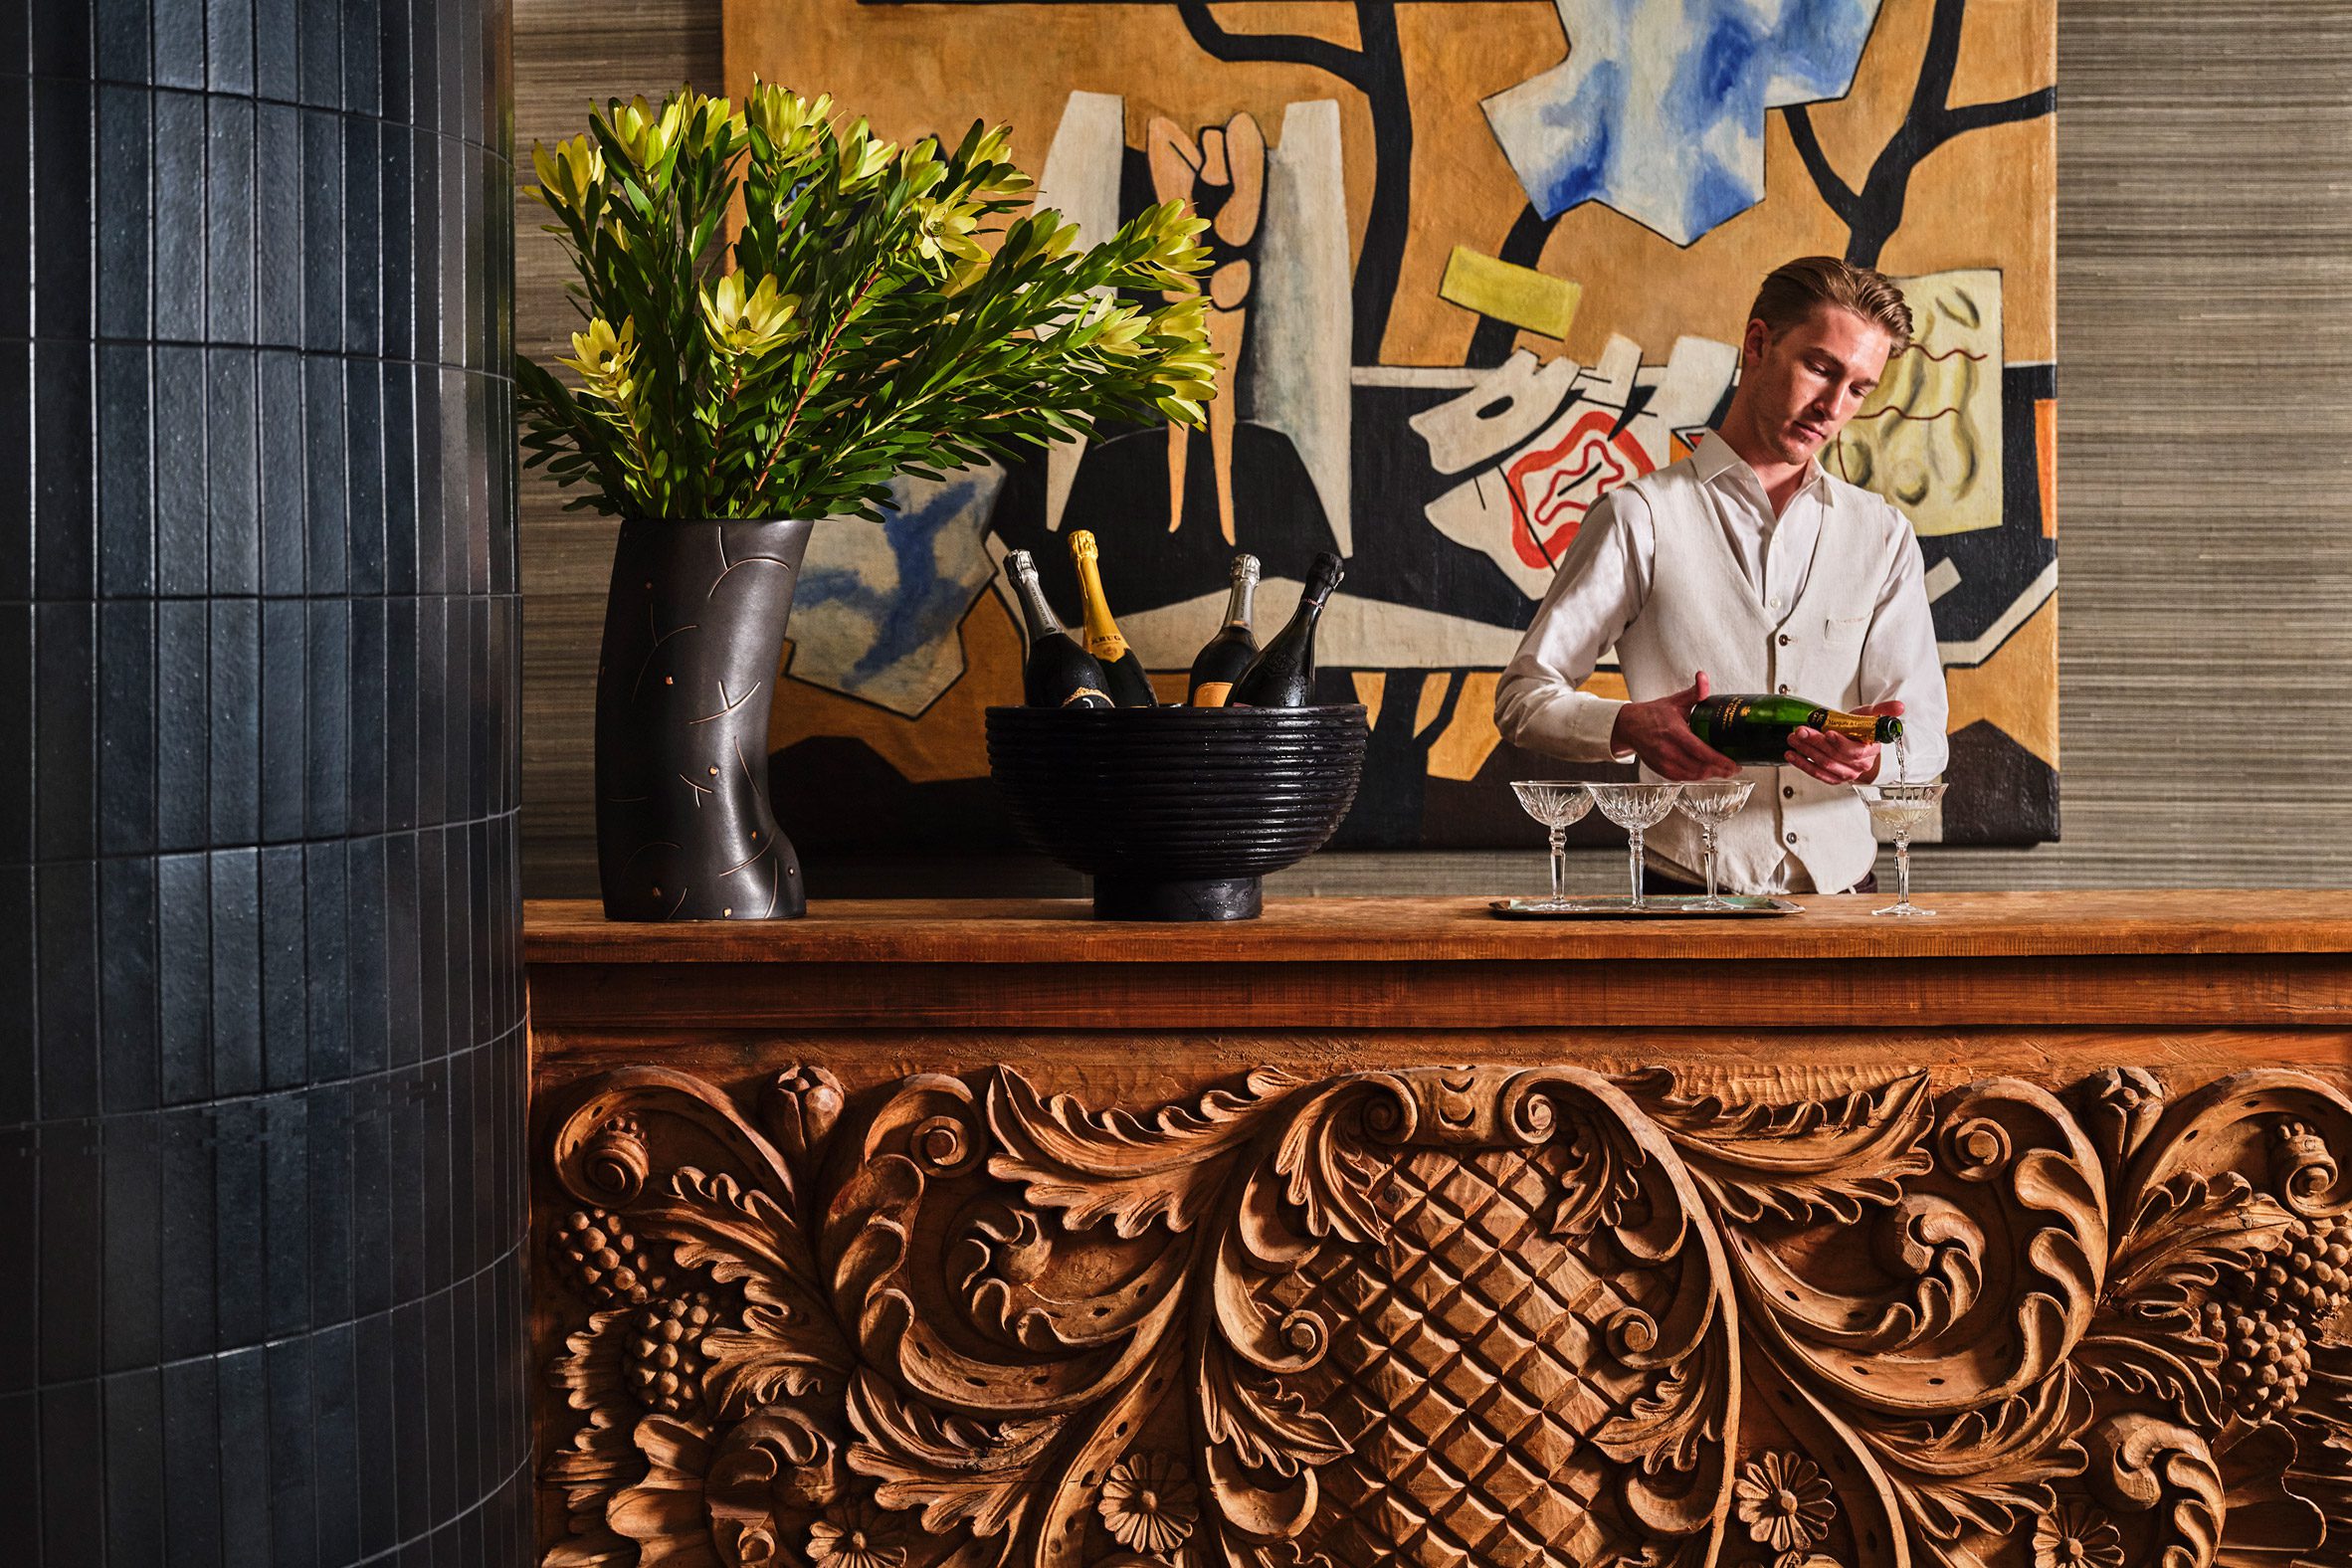 Bartender pours drinks behind an intricately detailed wooden bar